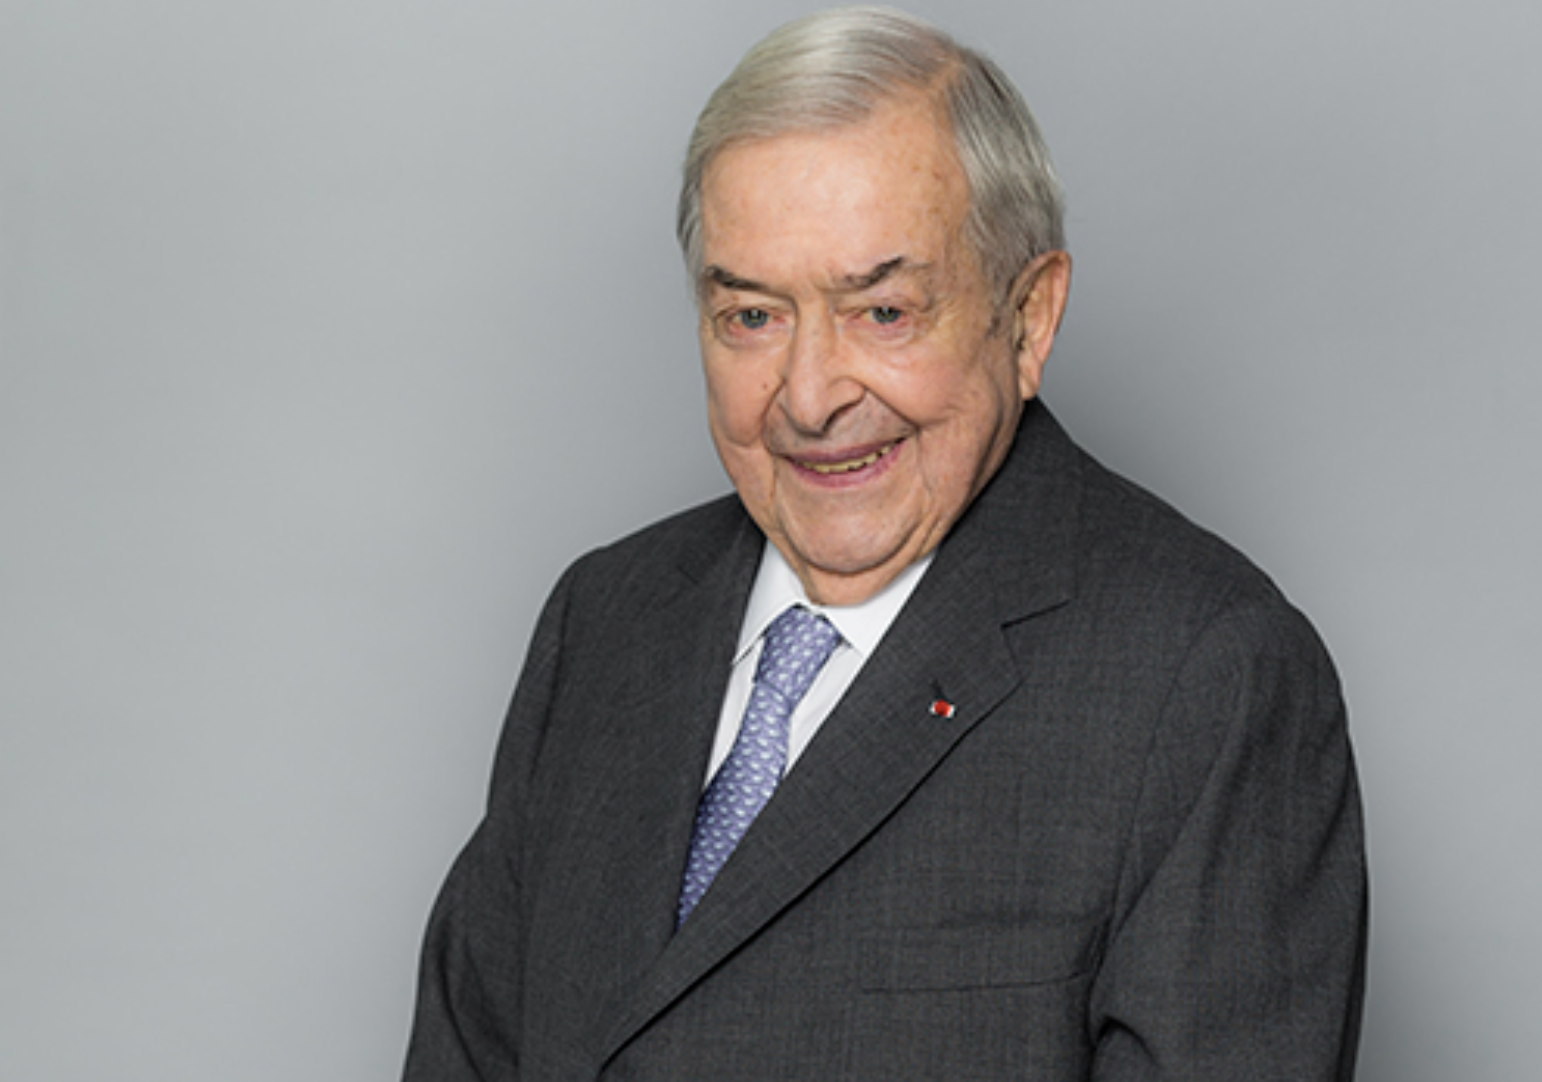 Sodexo Announces Passing of Founder and Chairman Emeritus Pierre Bellon